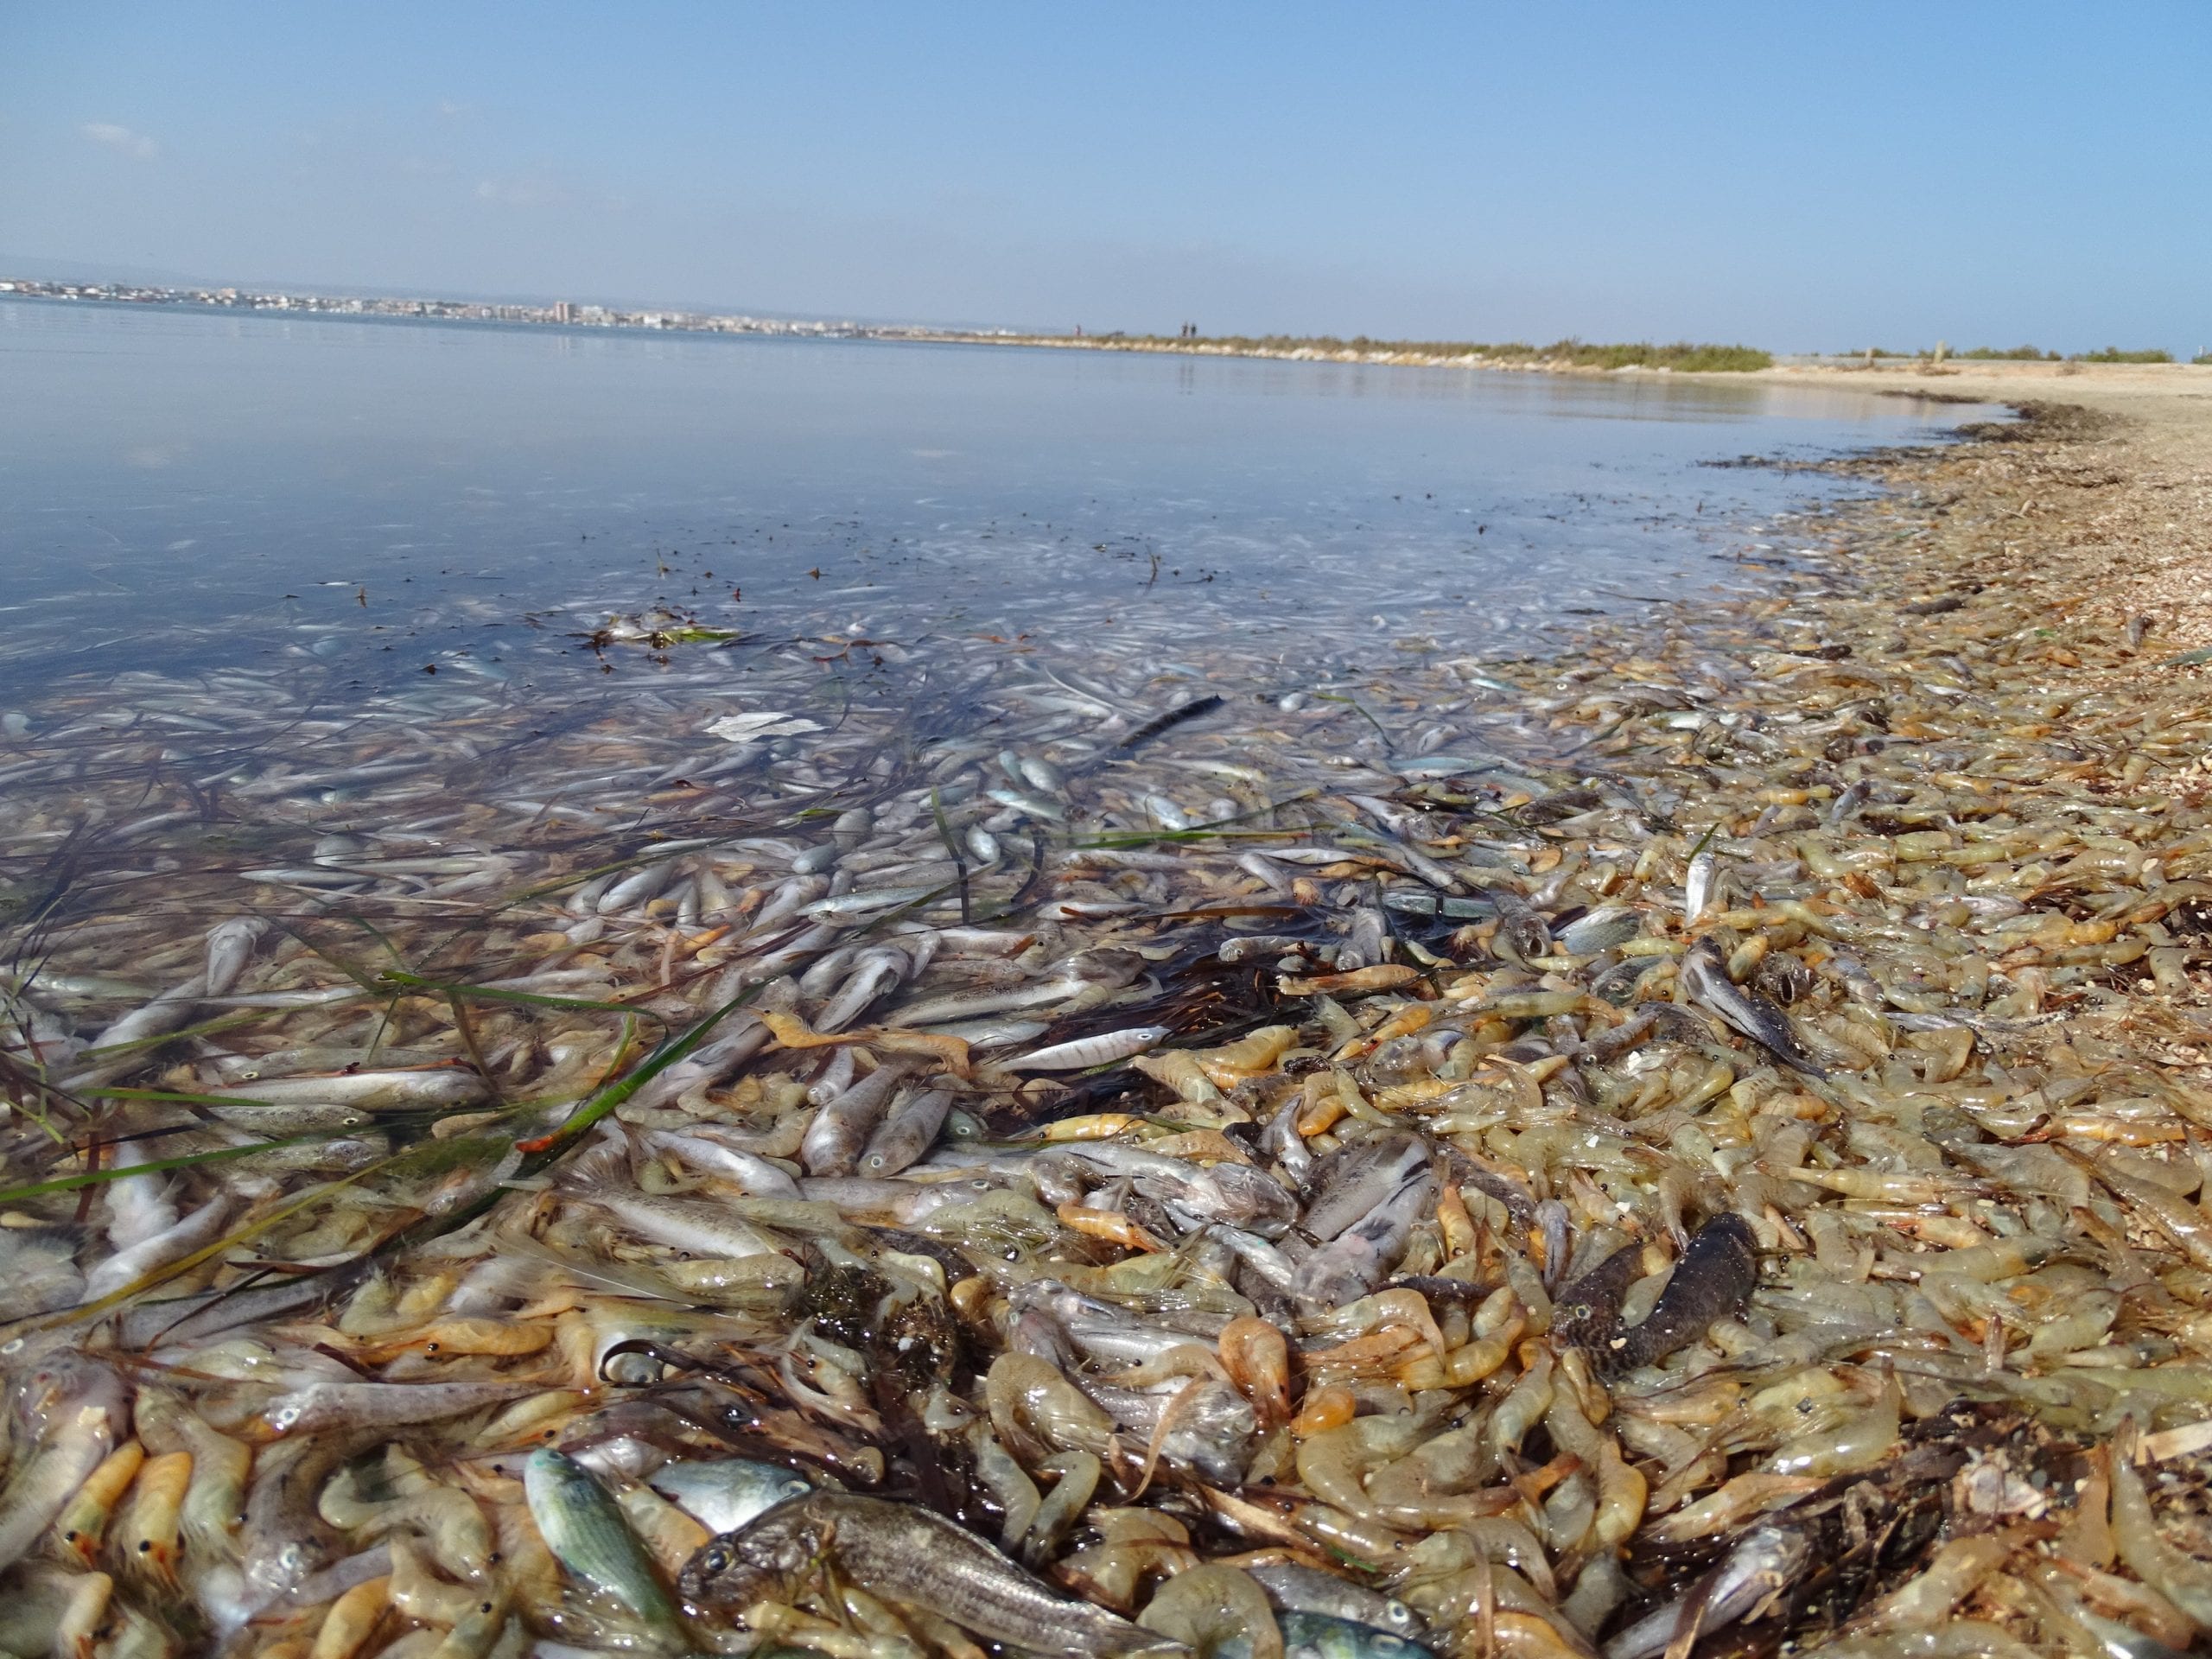 Judge says there's evidence of 'environmental crime' in his Mar Menor lagoon pollution investigation in Spain